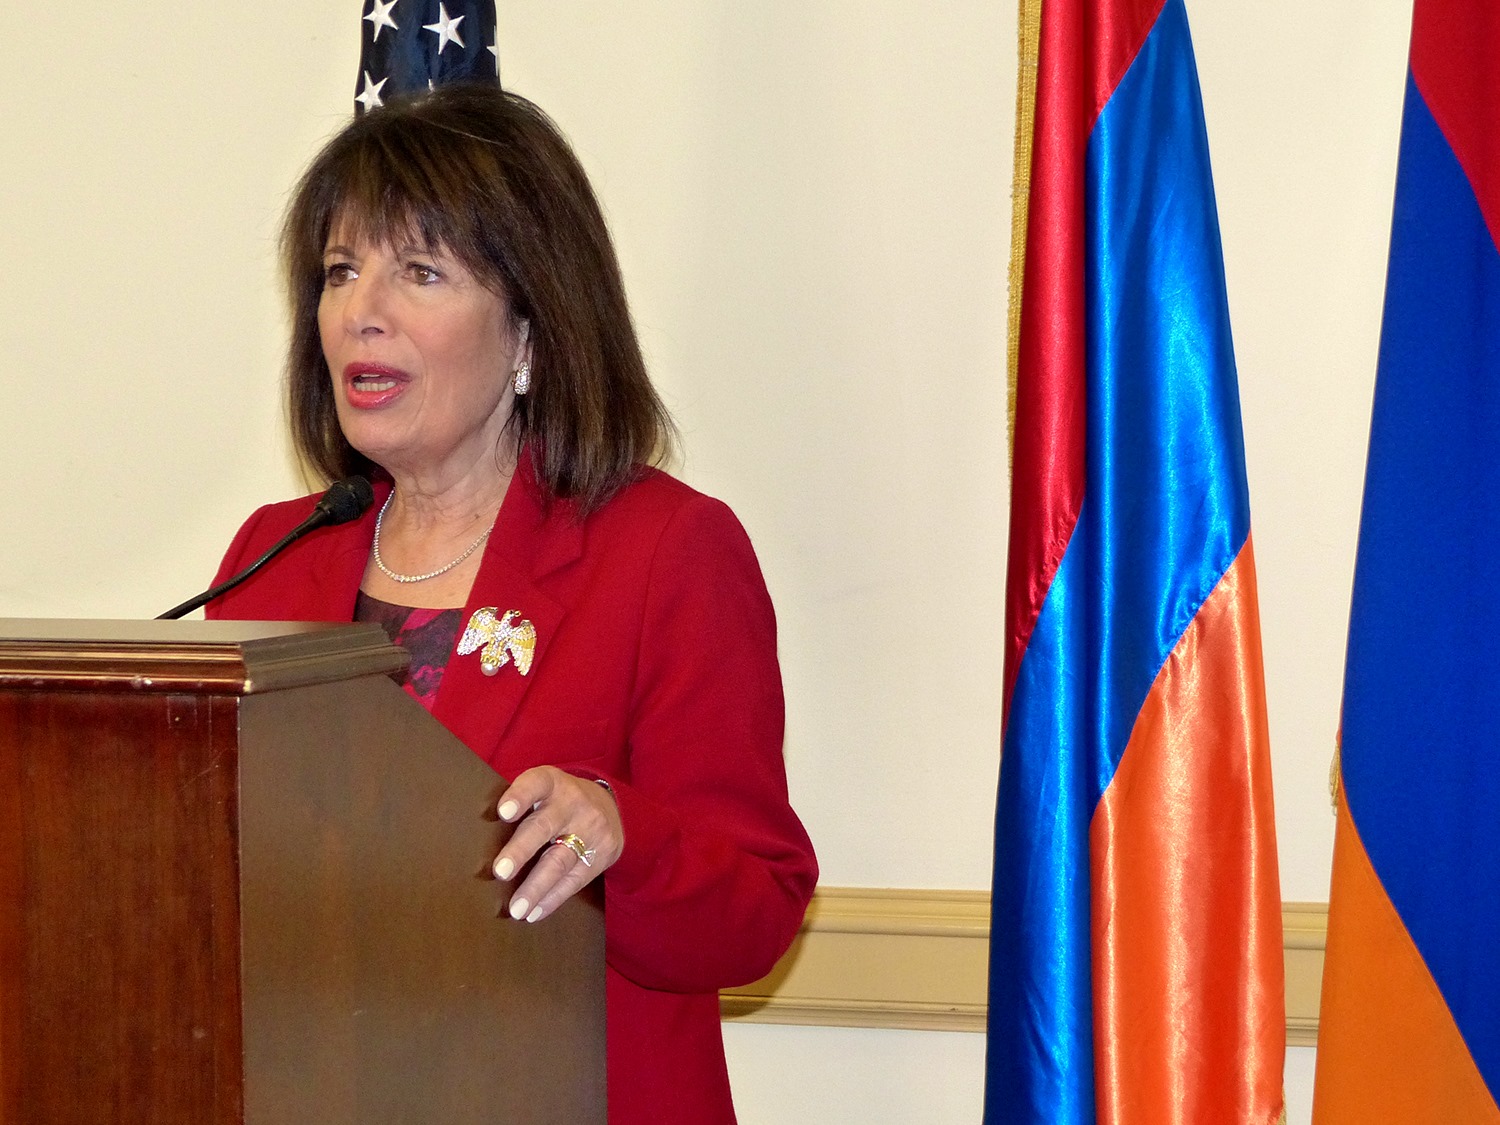 Rep. Speier submits NDAA amendment to zero-out U.S. military and security assistance to Azerbaijan